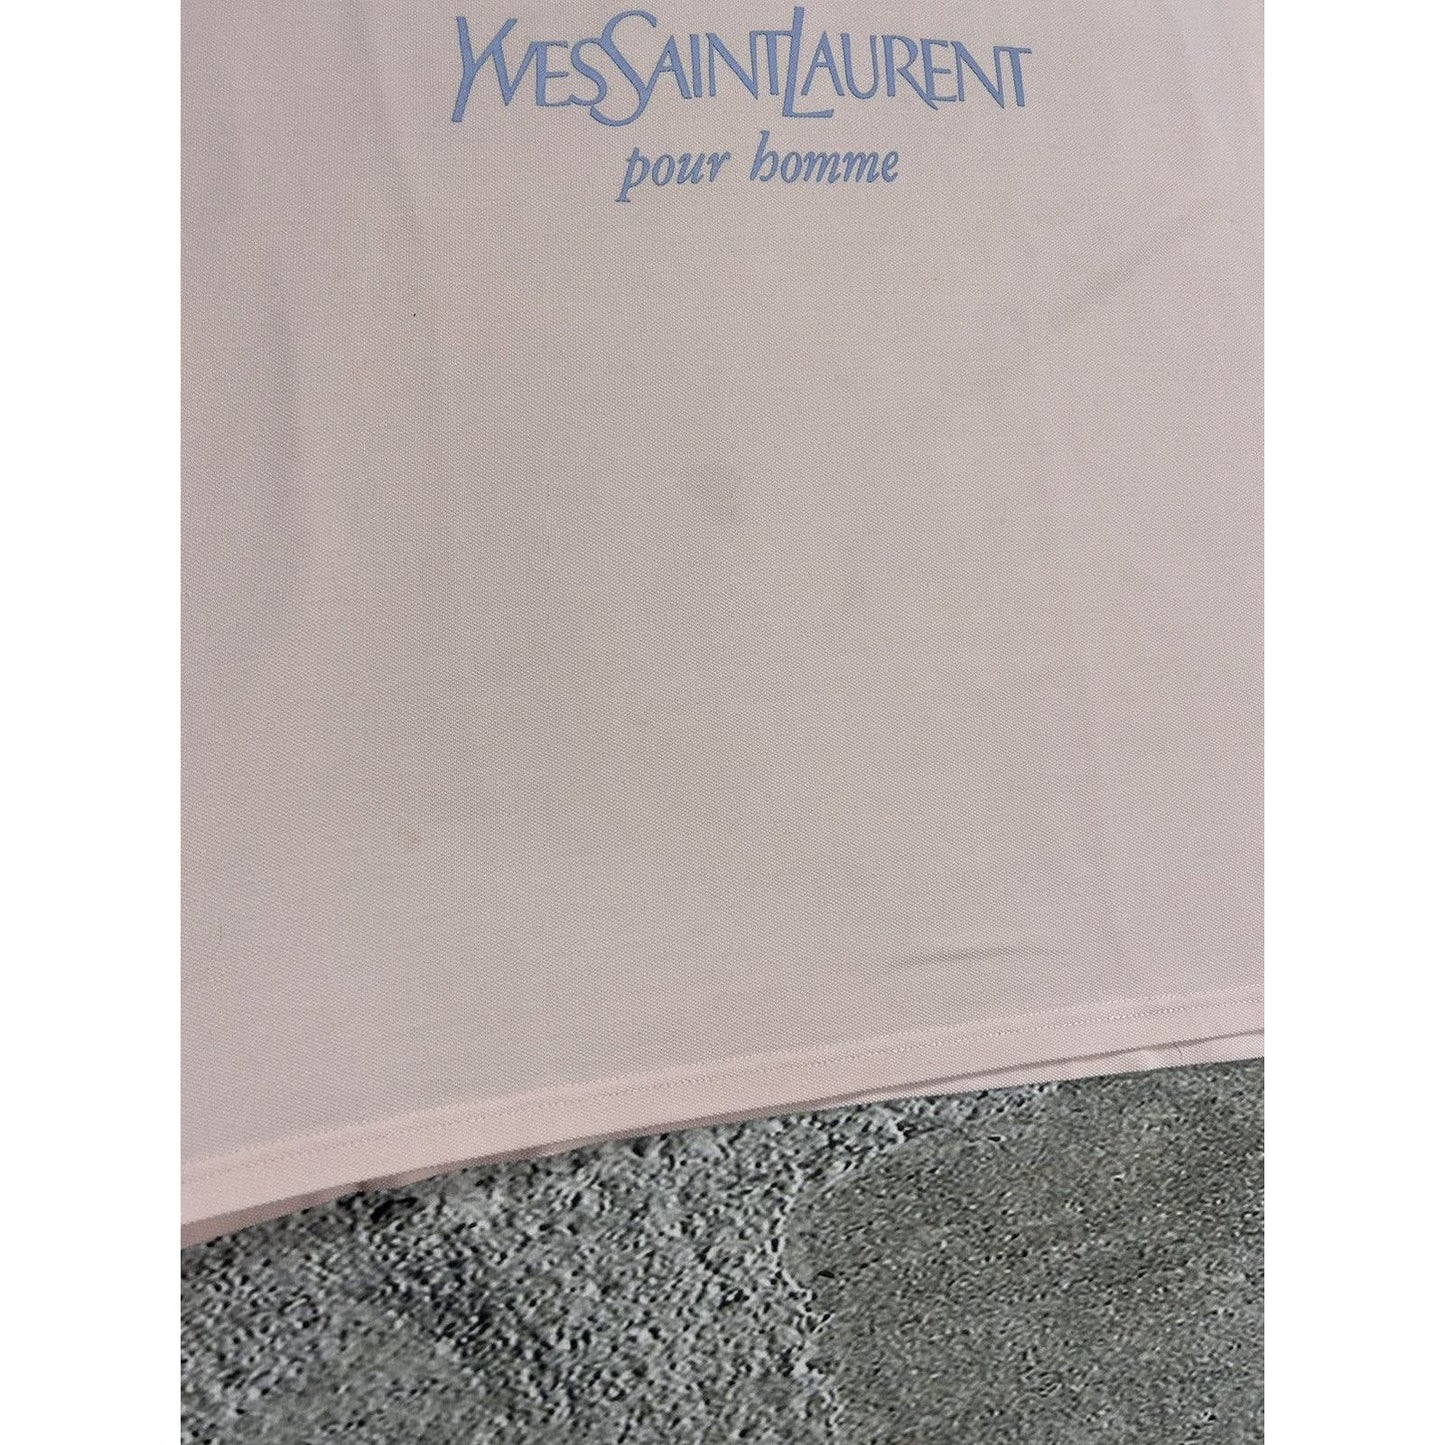 90s Yves Saint Laurent vintage big logo spell out YSL polo